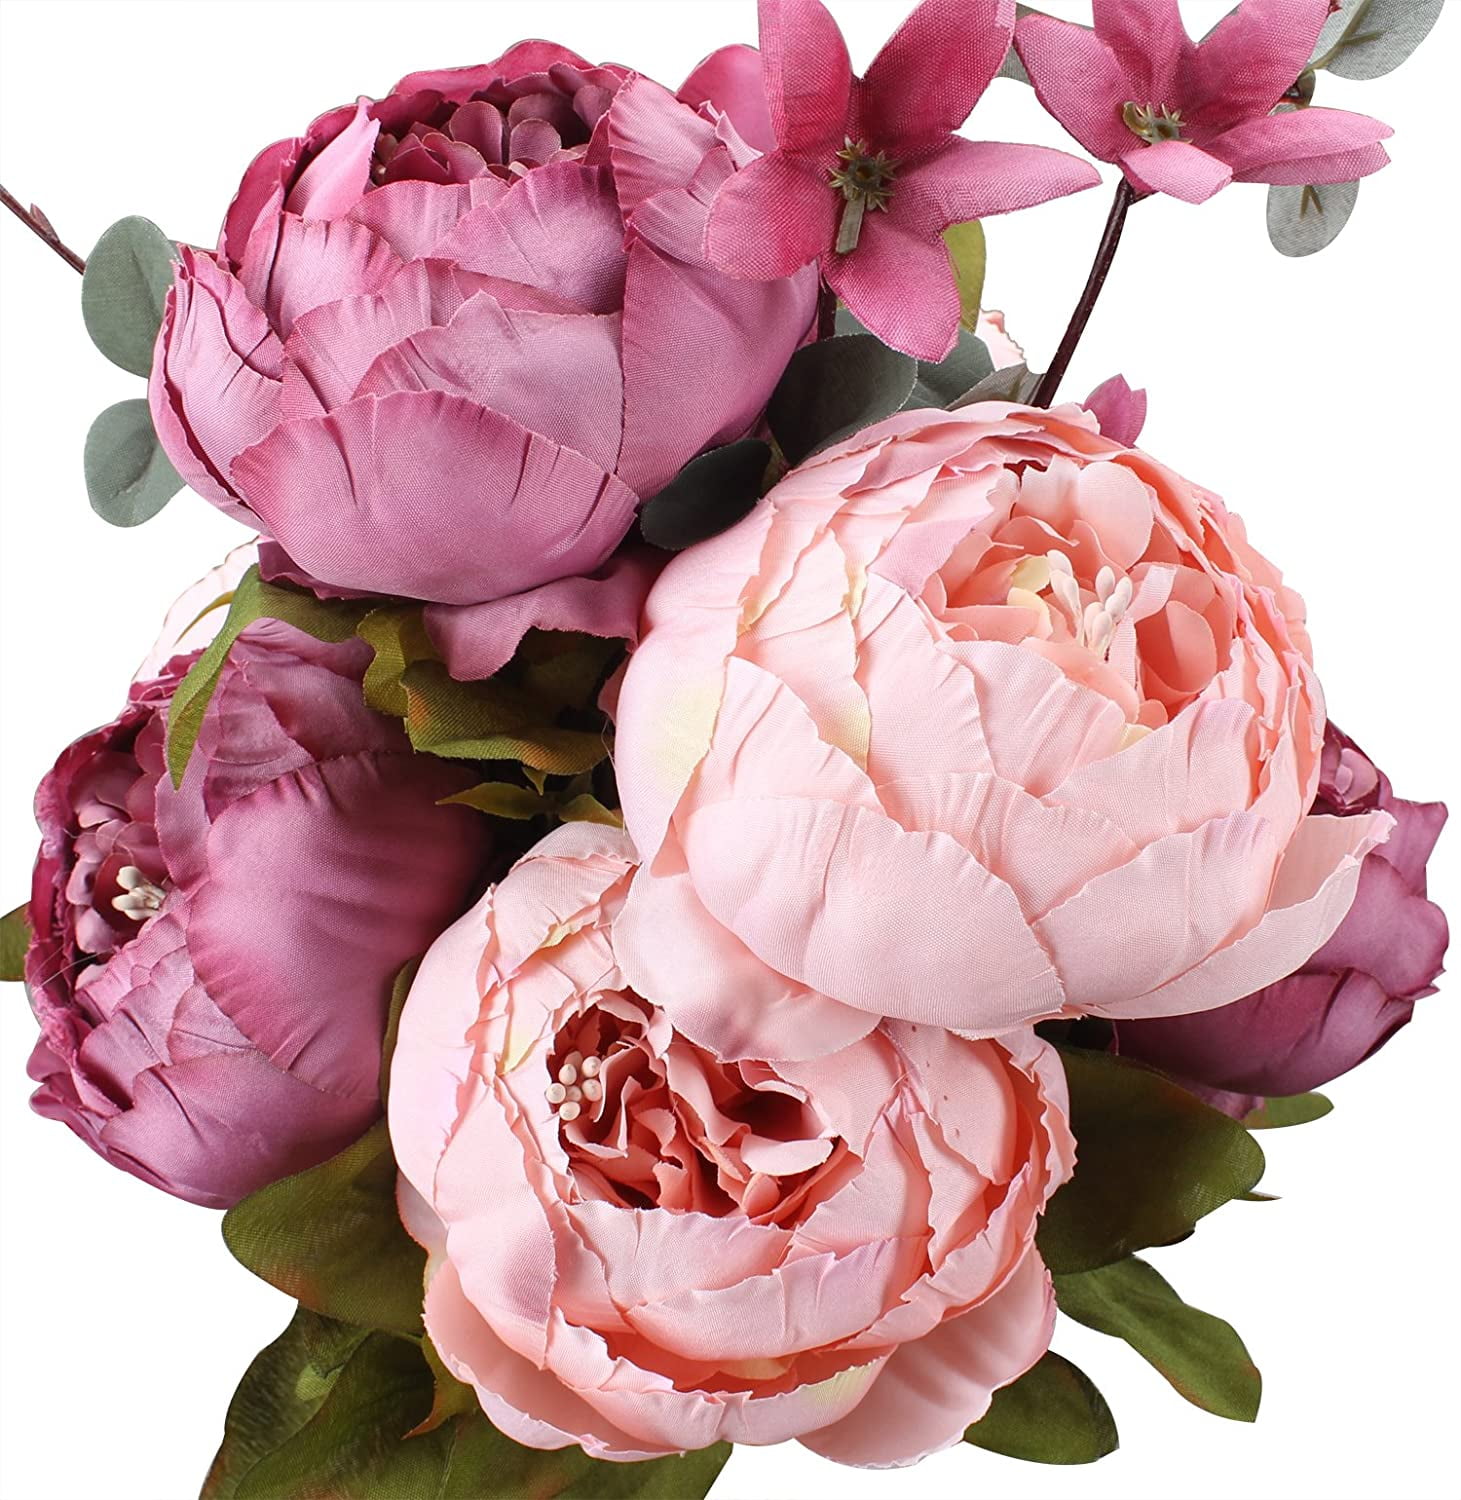 Pack of 1 New Sweetened Bean Silk Flowers Fake Peonies Vintage Bouquet Home Table Centerpieces Wedding Decoration